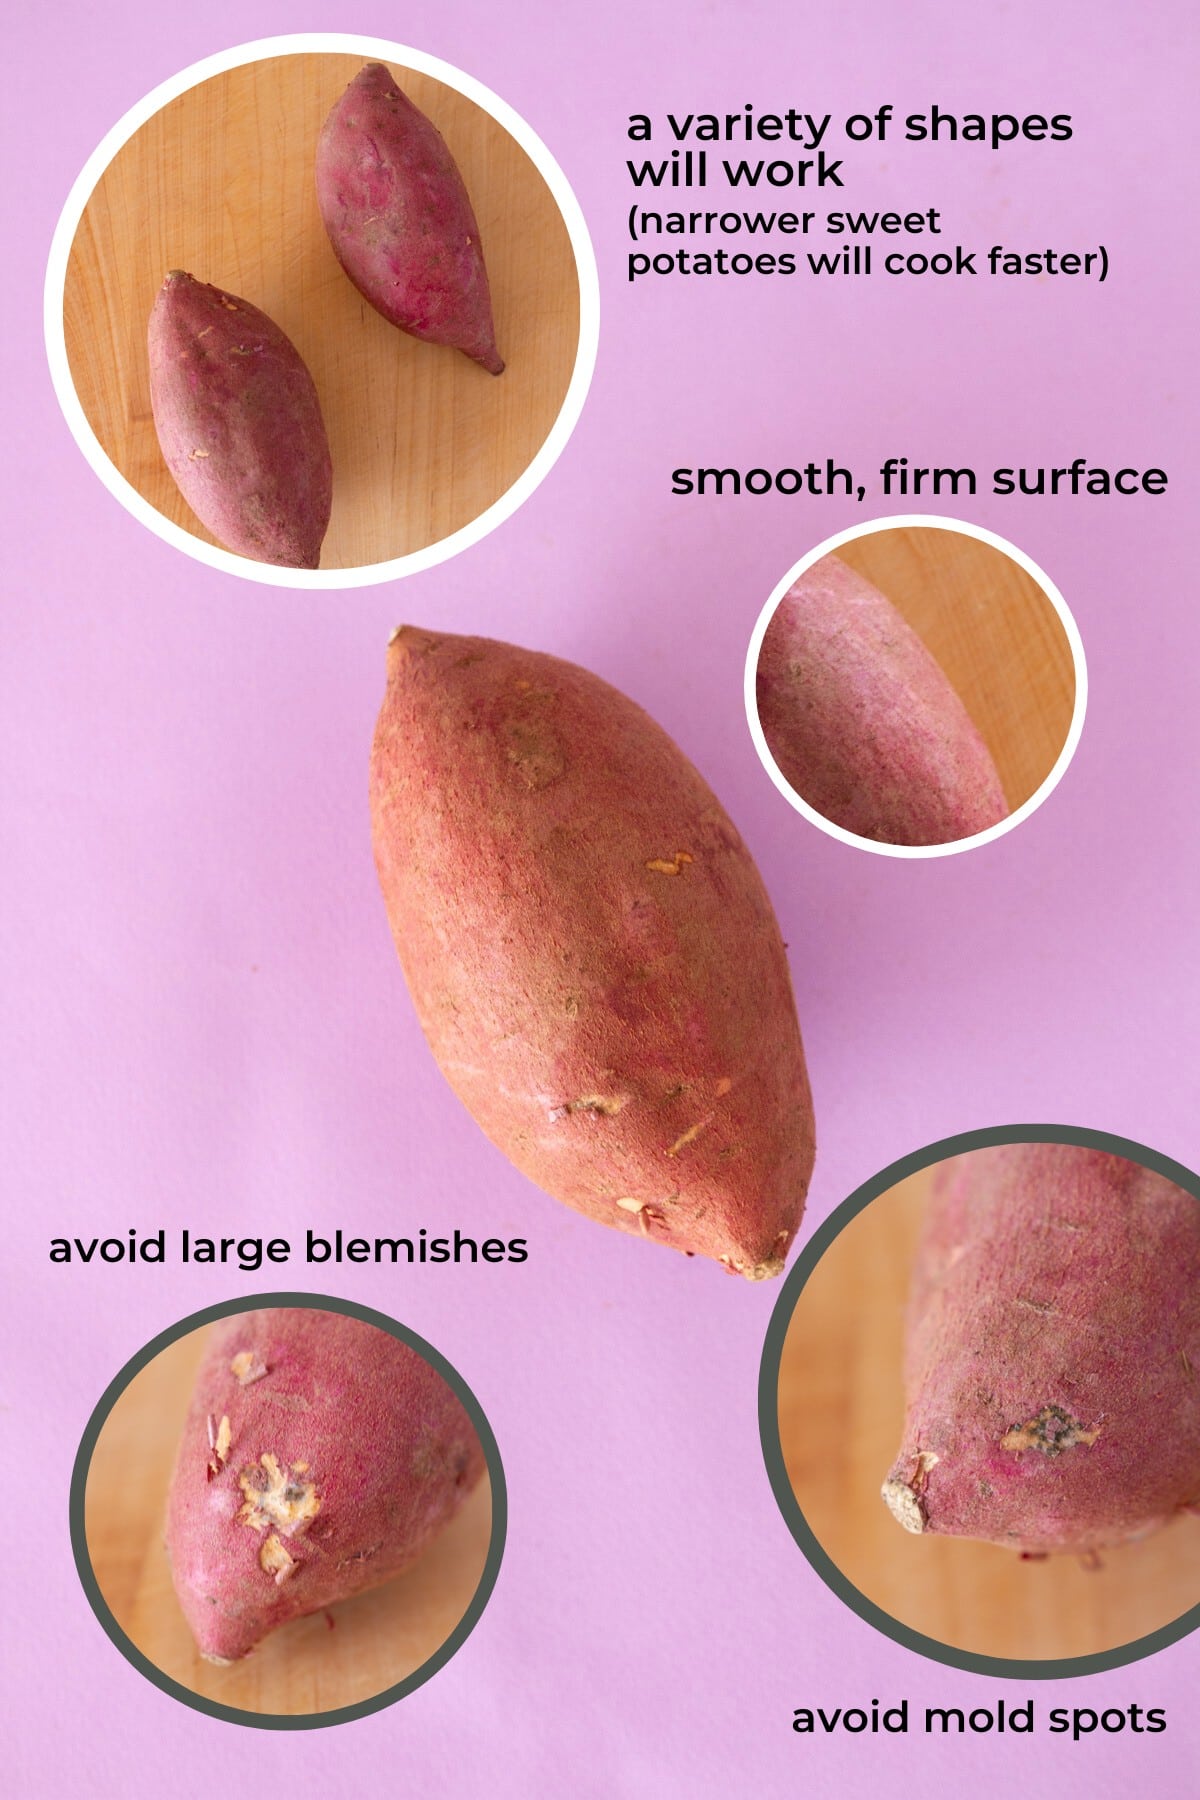 A Japanese sweet potato on a purple background with closeup photos and text showing visual cues to look for (a variety of shapes will work; narrower sweet potatoes will cook faster, a smooth and firm surface) and visual cues of what to avoid (large blemishes and mold spots).